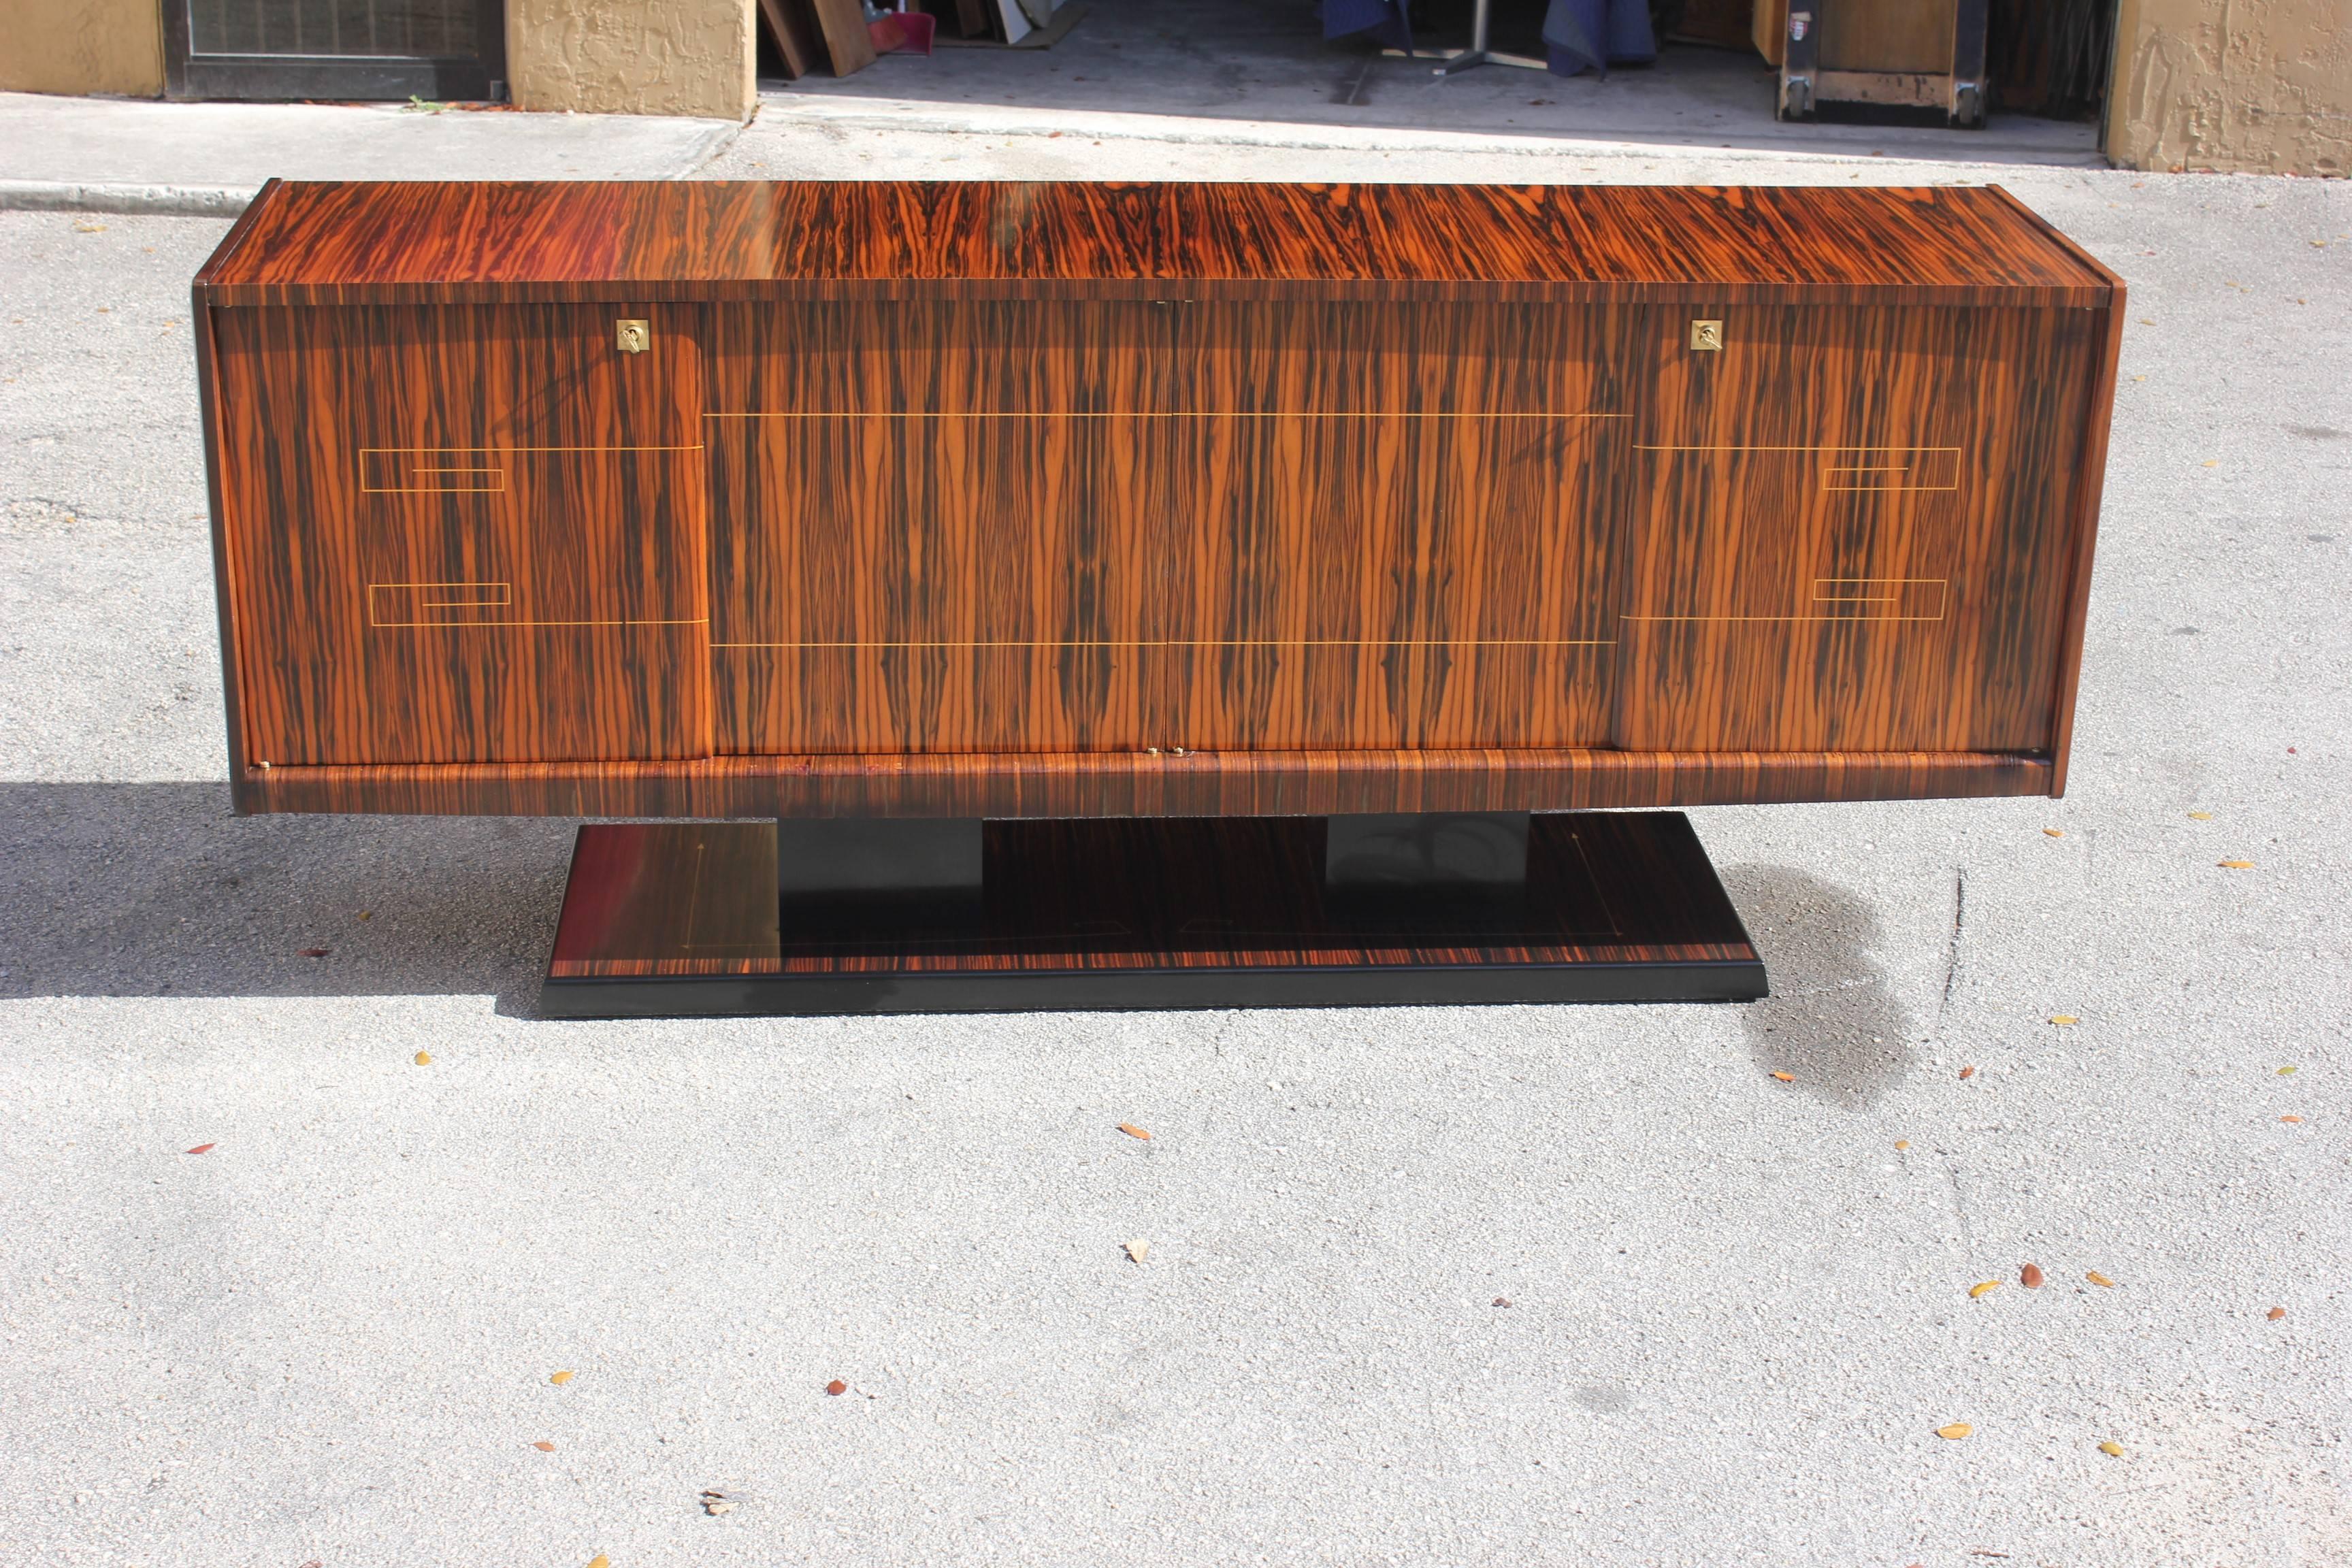 Beautiful French Art Deco exotic Macassar ebony sideboard or buffet, with the cabinetry expertly fitted and balanced and raised upon a platform base Macassar ebony with sycamore inlay. The sideboard are in perfect condition, circa 1940. Size 87 W x